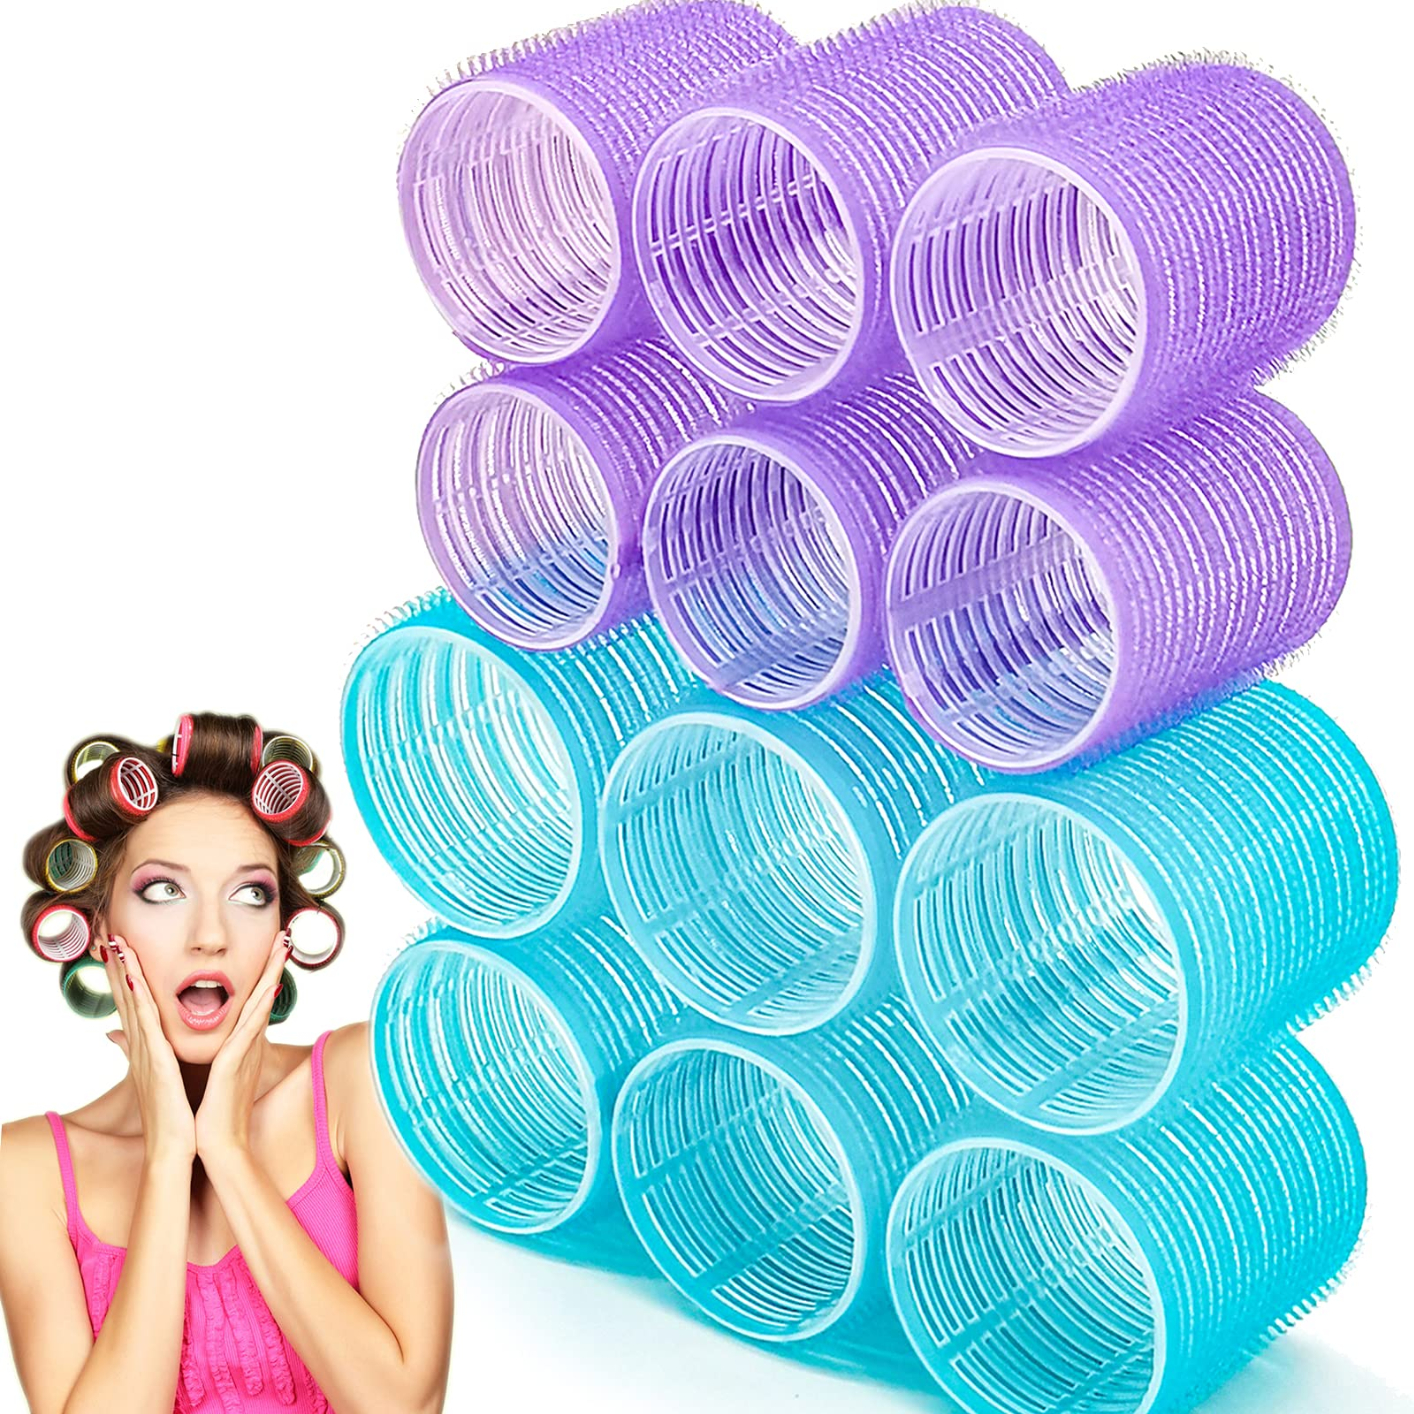 Vary Size 6pcs Hair Roller Sets, Self Grip Salon Hair Dressing Curlers for DIY Curly Hairstyle for Women, Heatless Hair Curlers Color Randomly